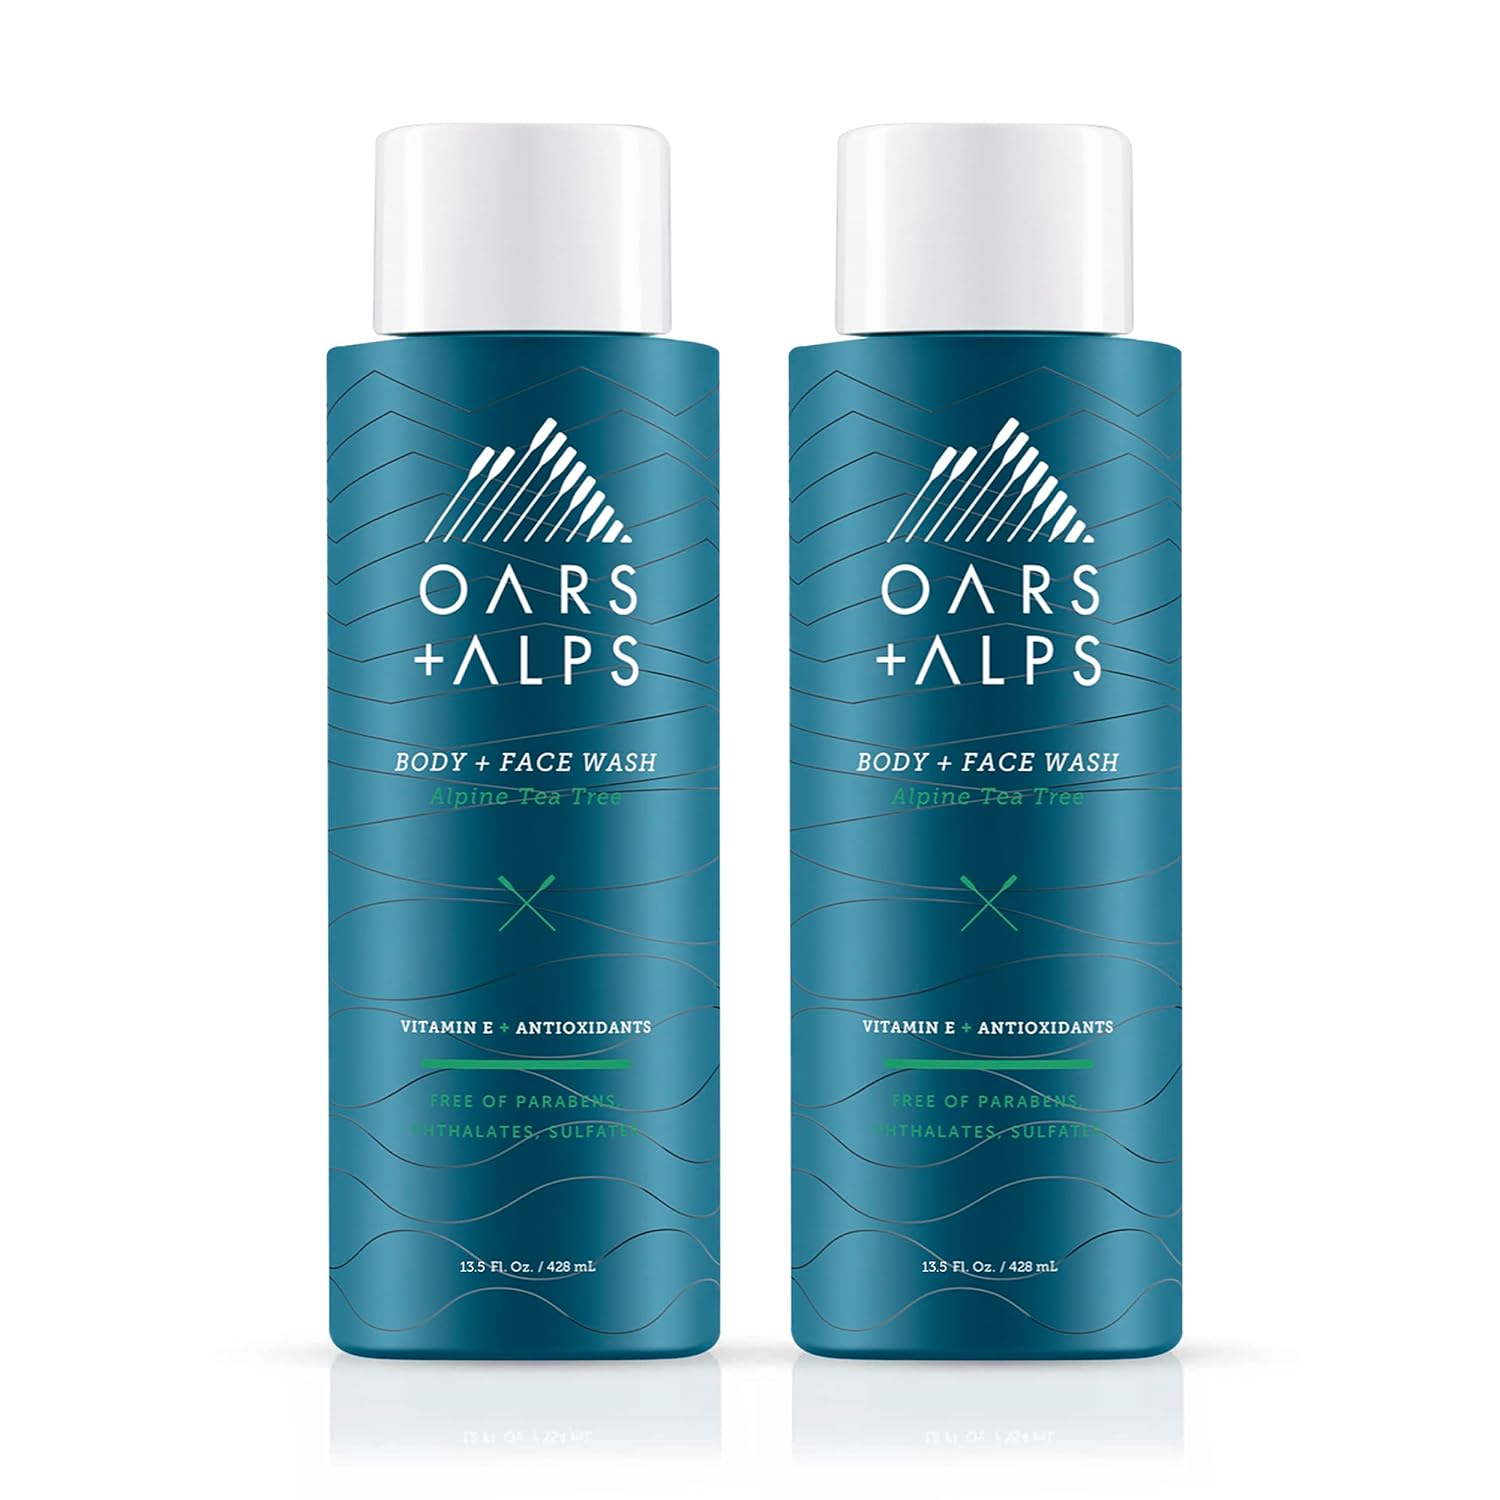 Oars + Alps Men's Moisturizing Body and Face Wash, Skin Care Infused with Vitamin E and Antioxidants, Sulfate Free, Alpine Tea Tree, 2 Pack